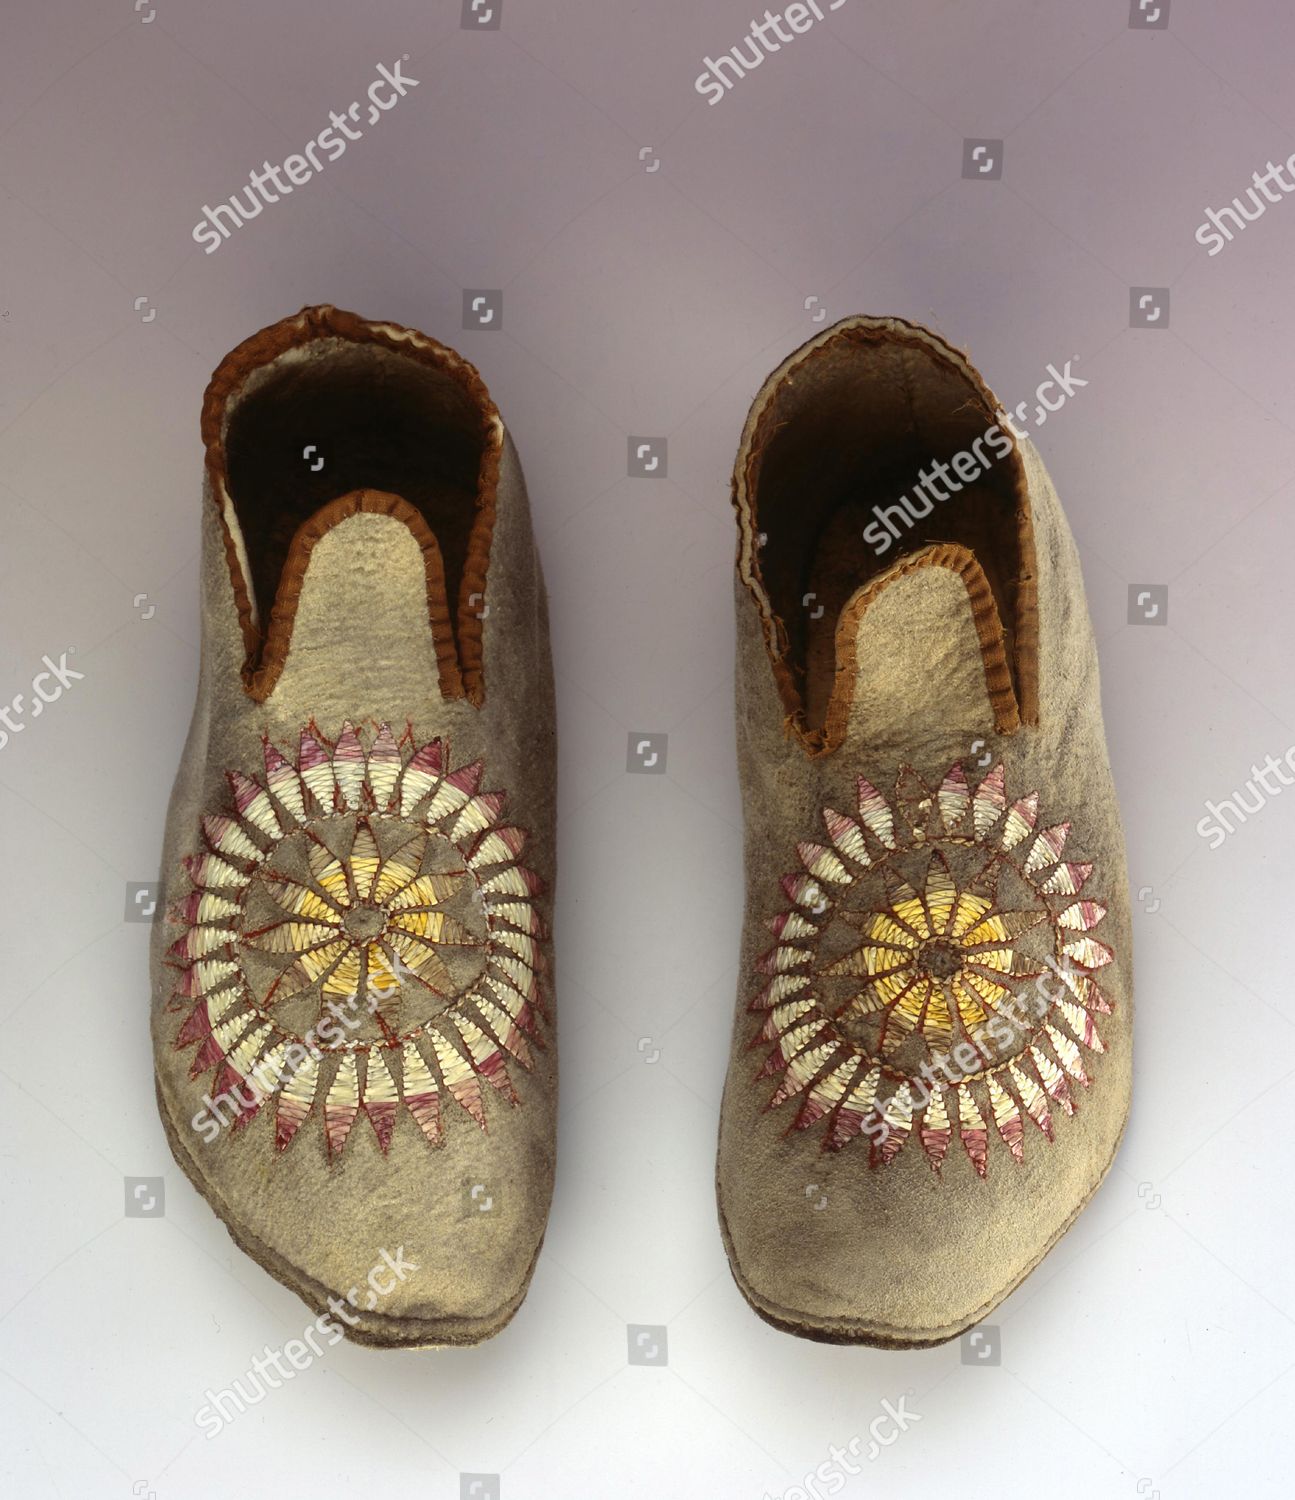 rawhide moccasin soles